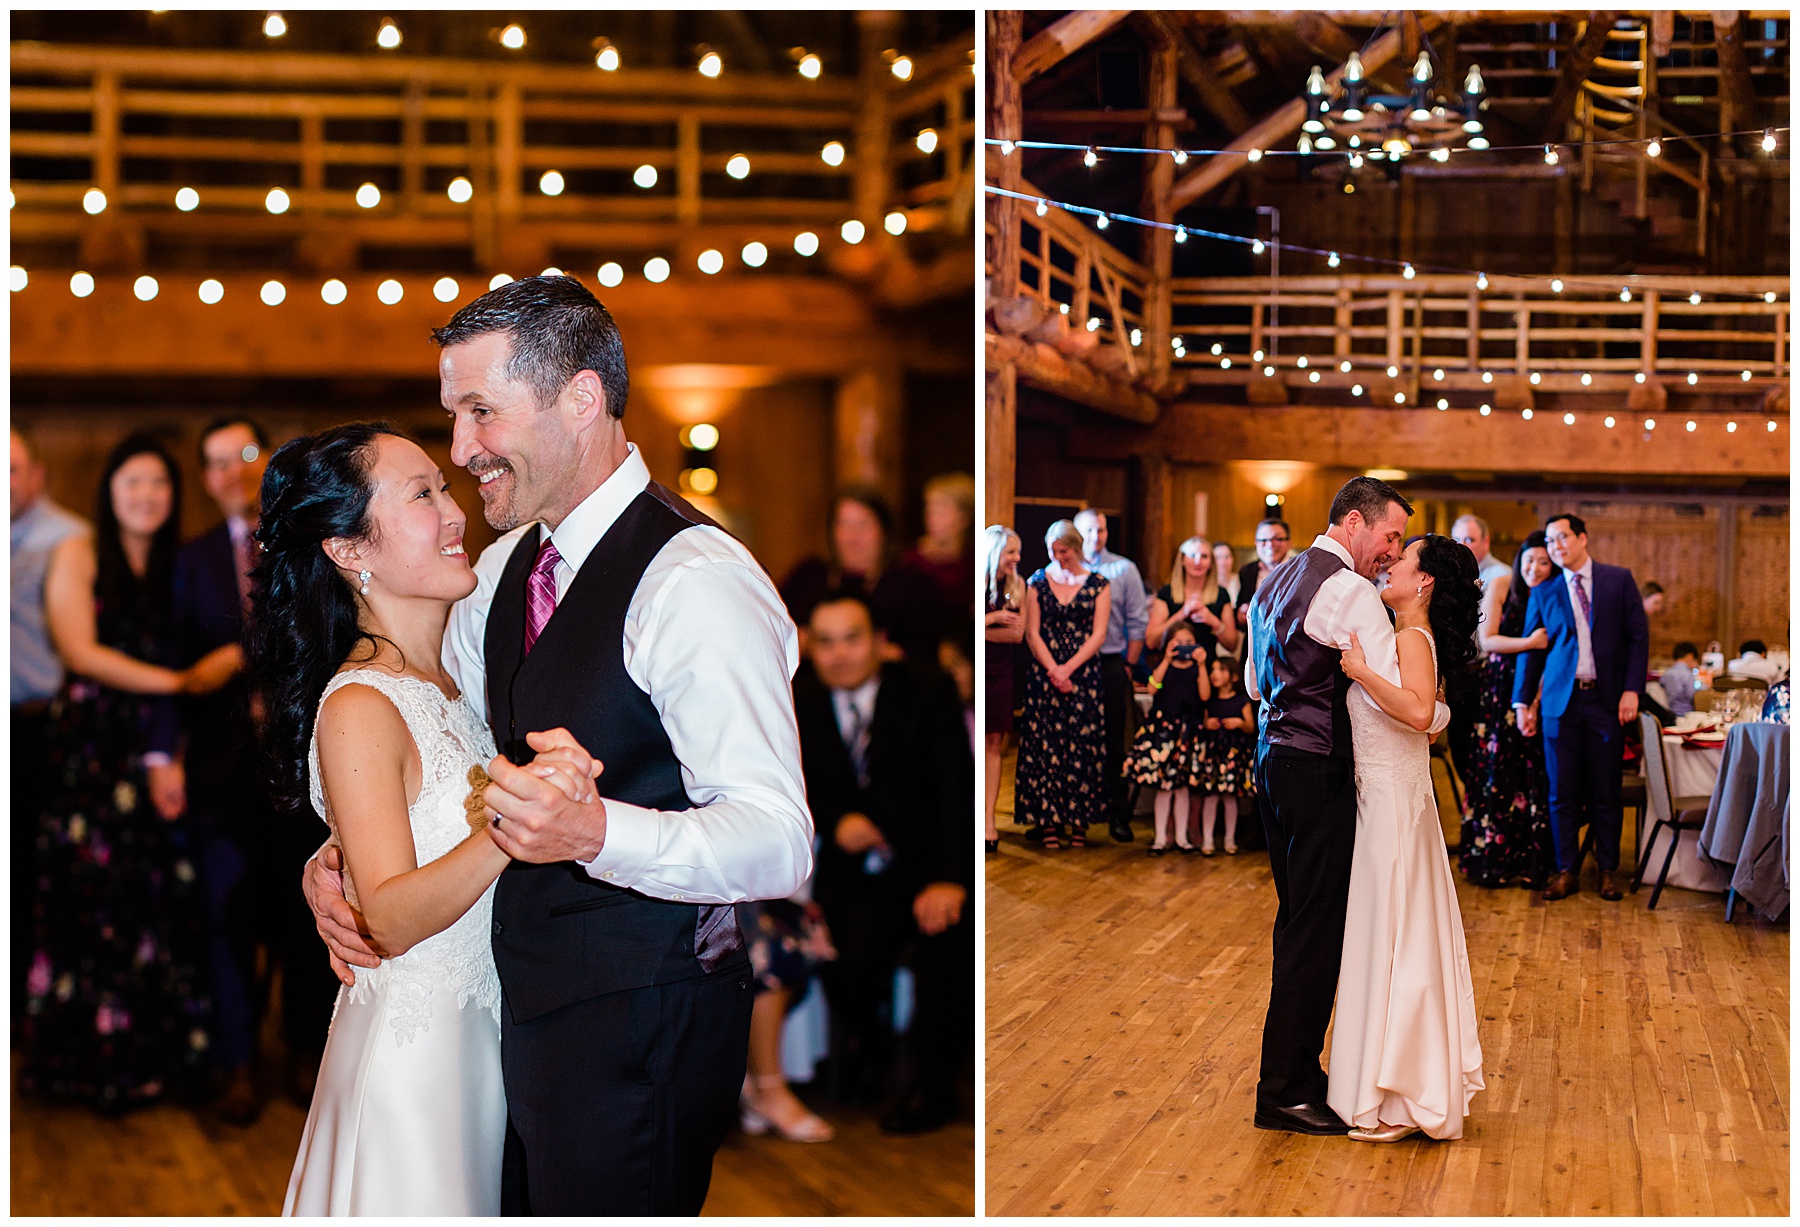 A portrait of the couple sharing their first dance under a sultry string on lights at their Sunriver Resort Fall Riverfront Wedding